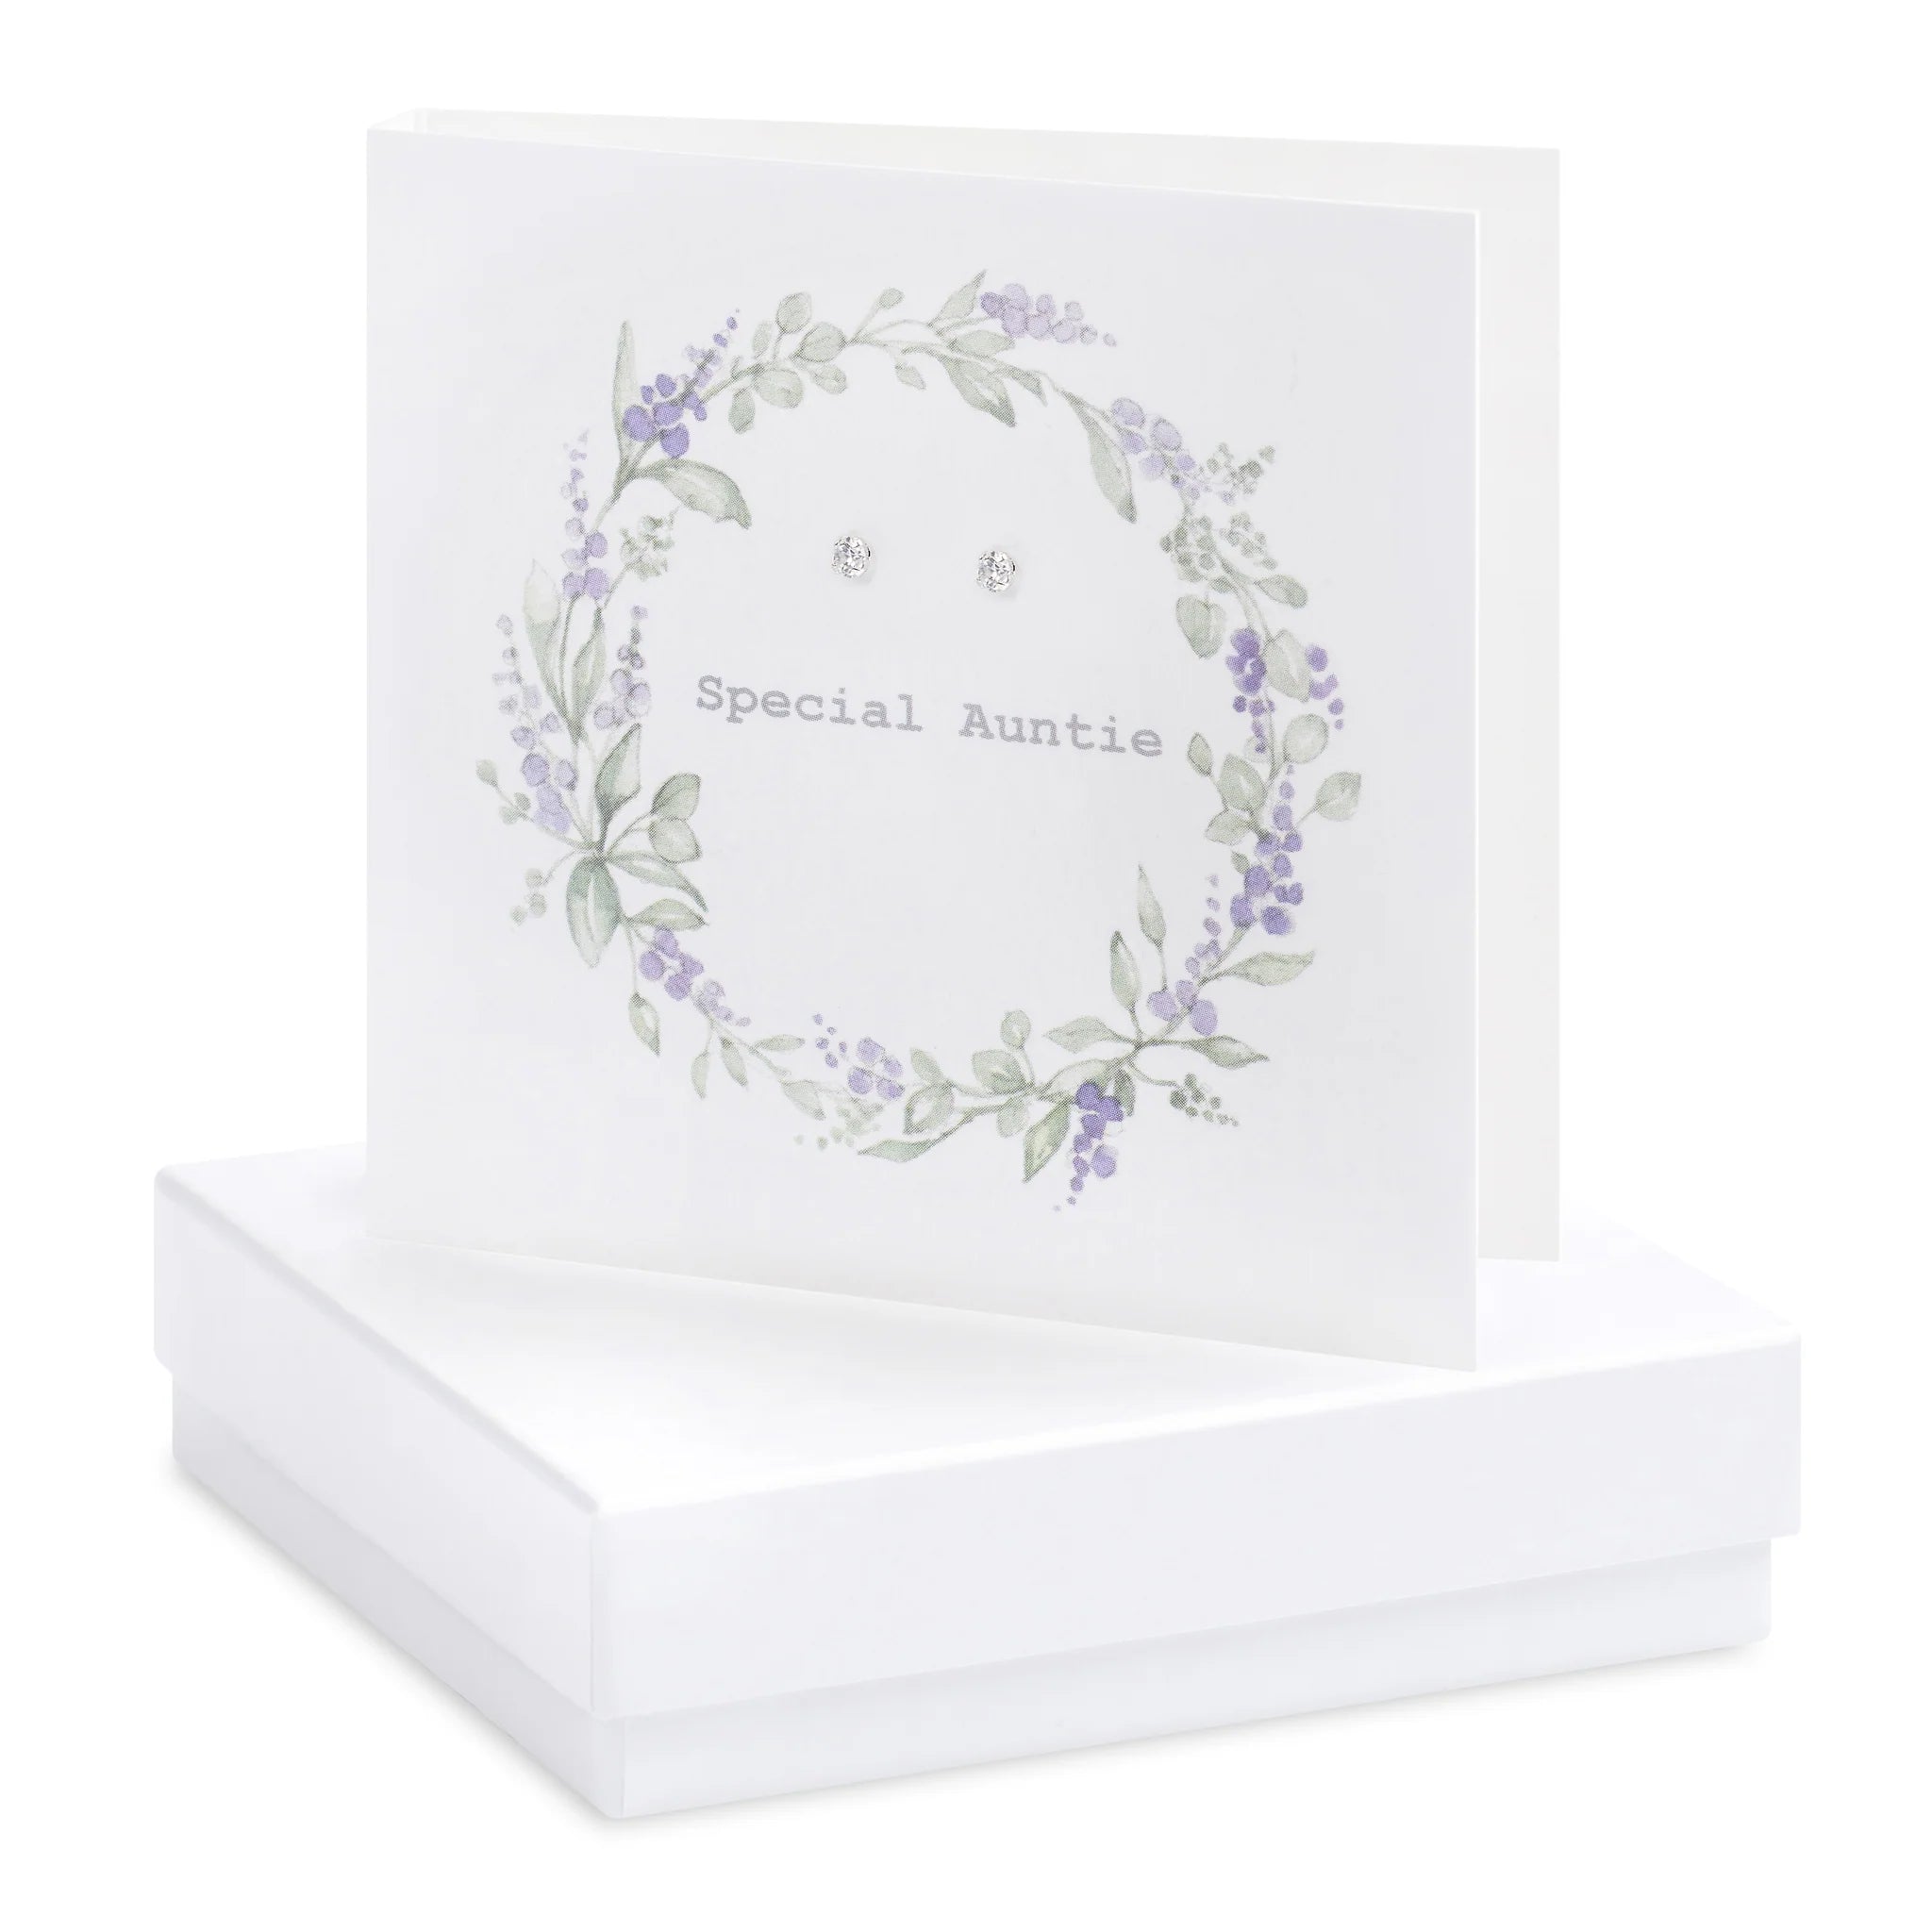 Crumble & Core  Lavender Wreath Auntie Card with Earrings in a White Box by Weirs of Baggot Street